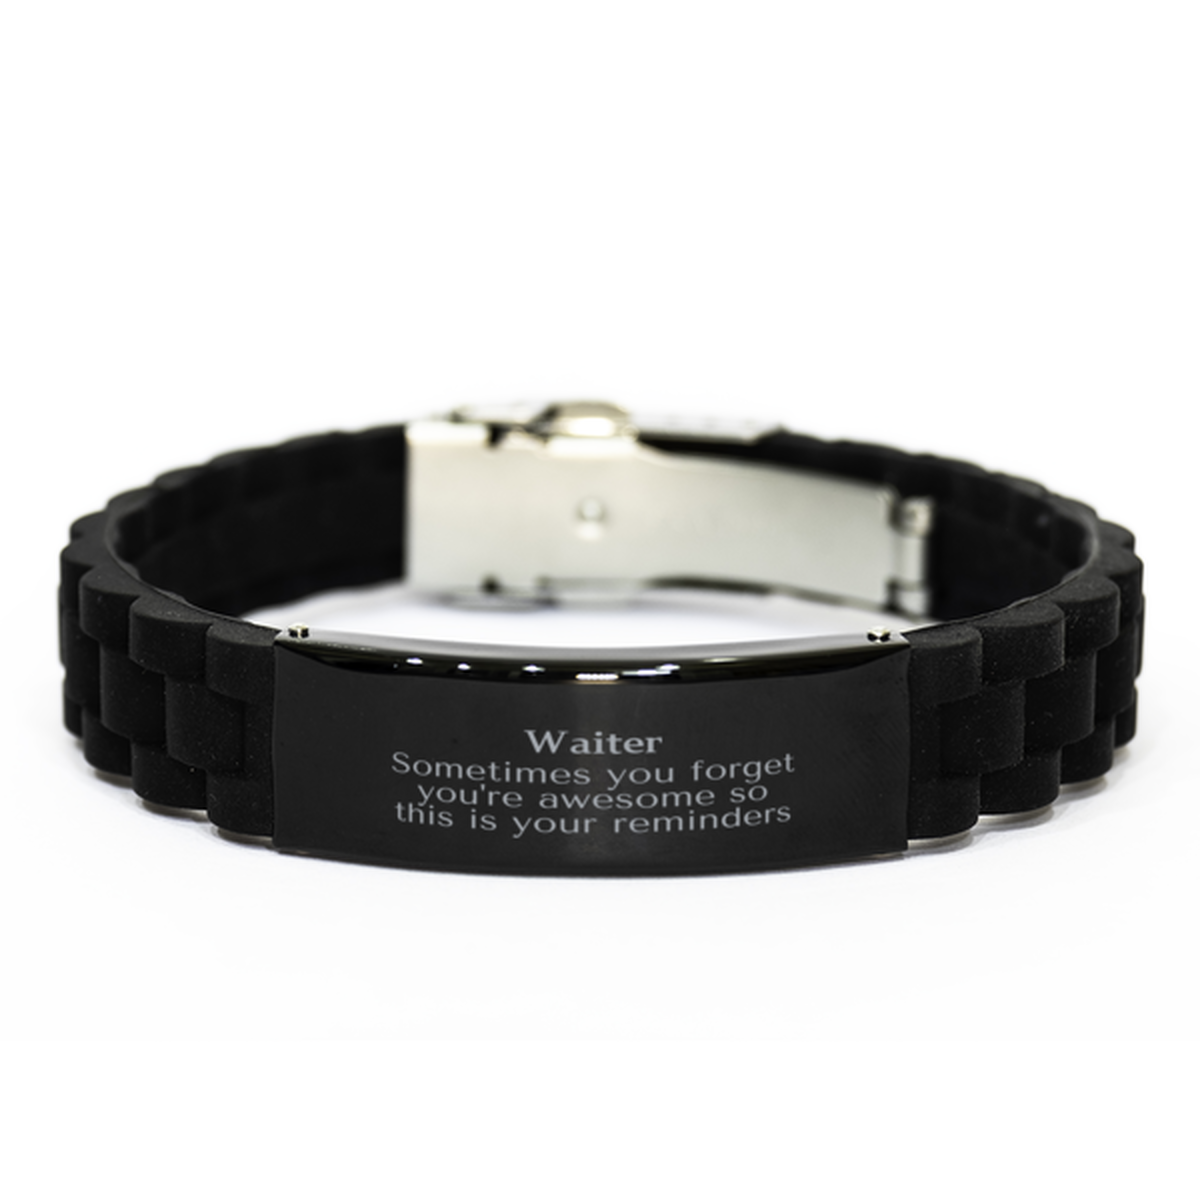 Sentimental Waiter Black Glidelock Clasp Bracelet, Waiter Sometimes you forget you're awesome so this is your reminders, Graduation Christmas Birthday Gifts for Waiter, Men, Women, Coworkers